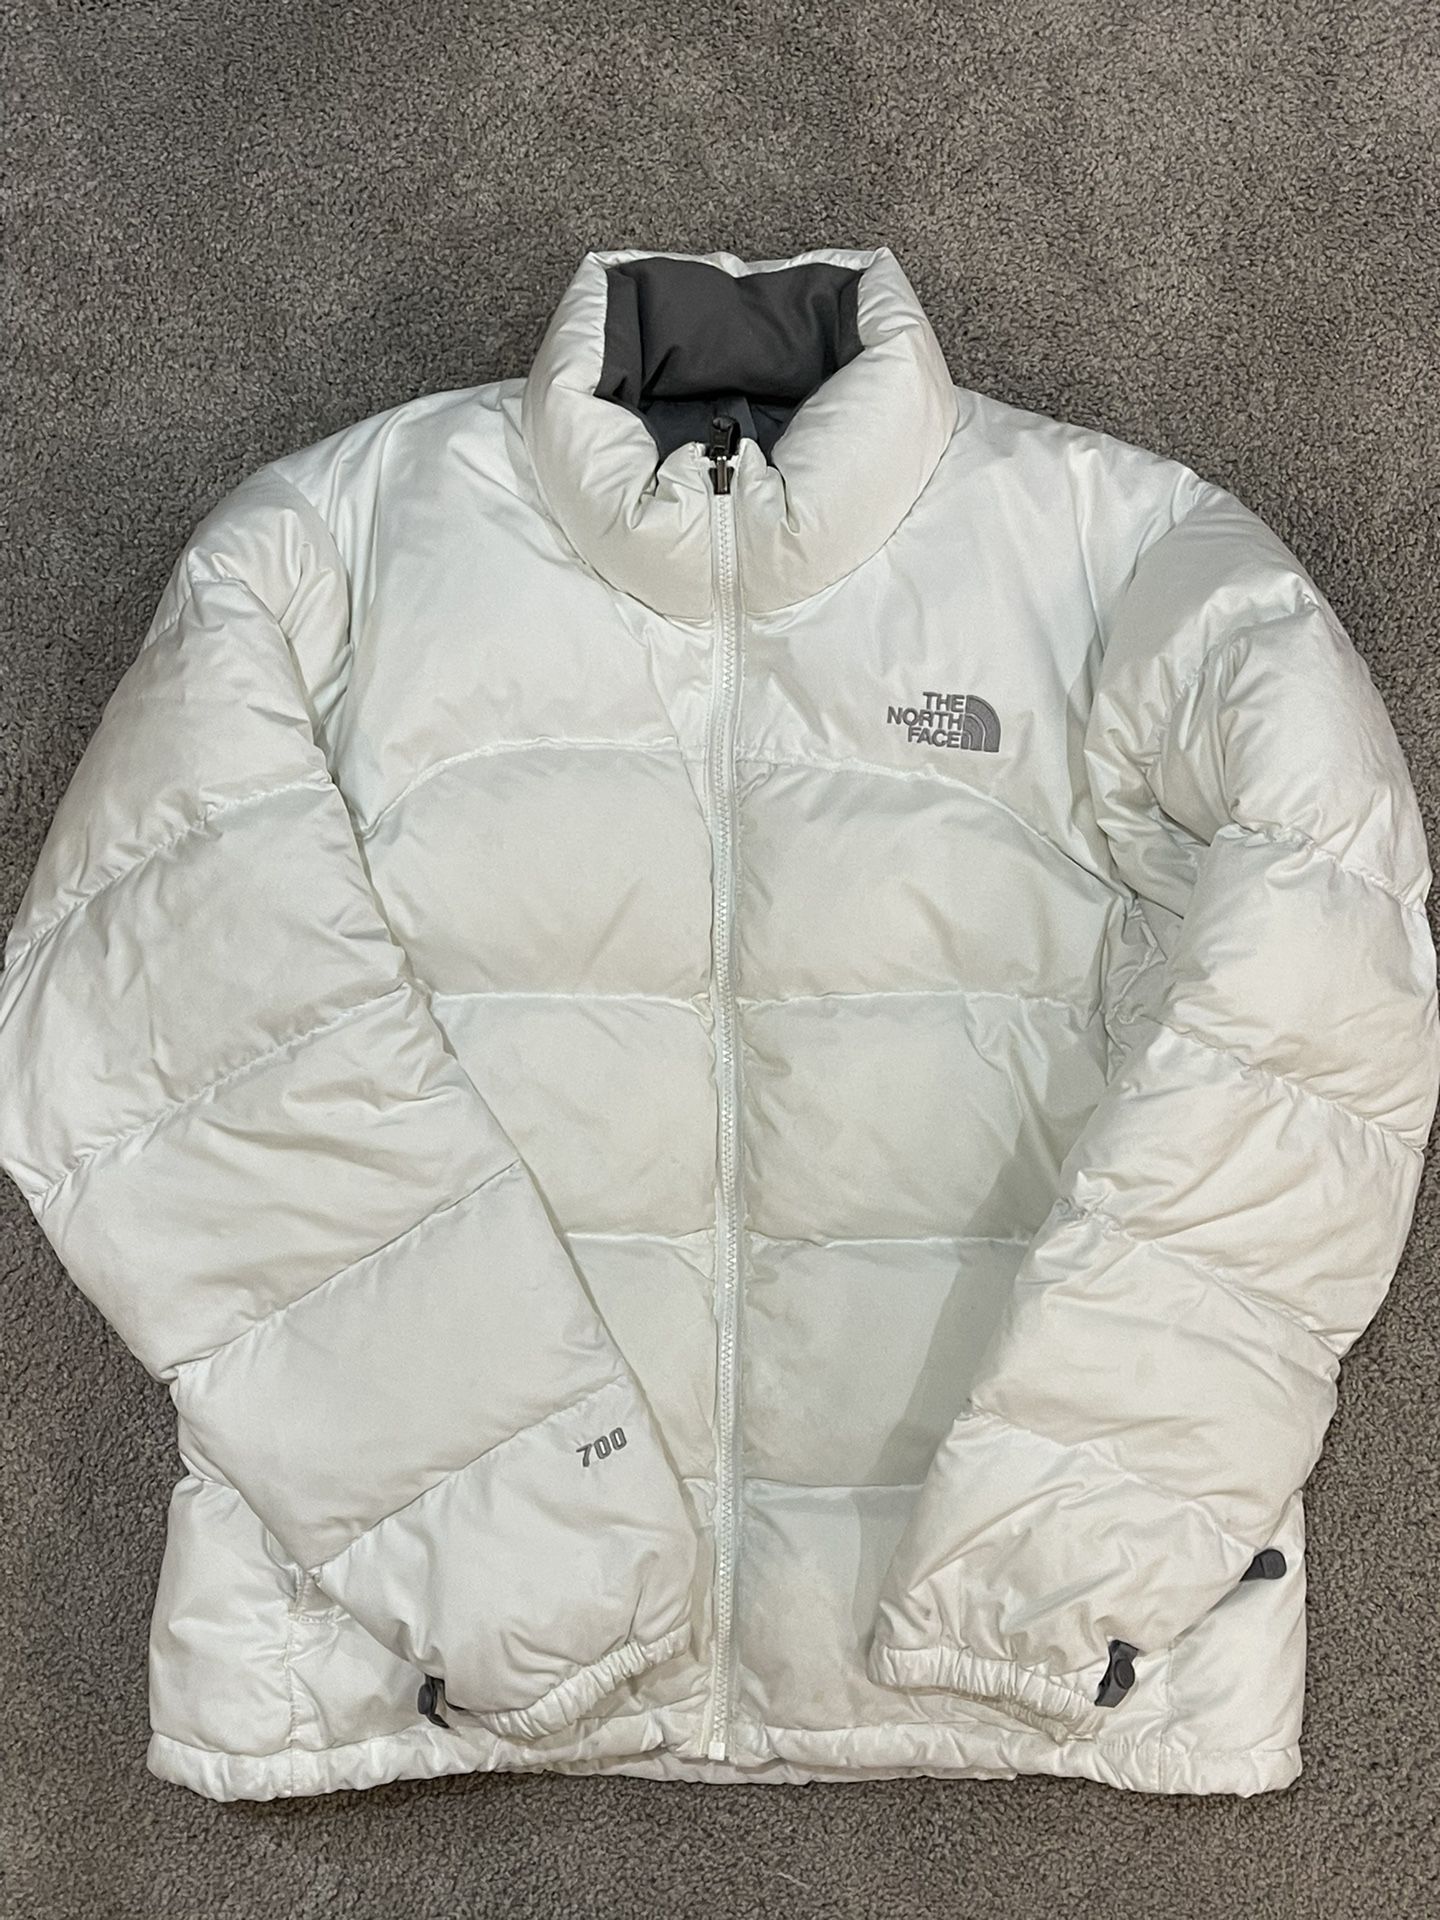 White North Face Puffer Jacket for Sale in Rockville Centre, NY - OfferUp